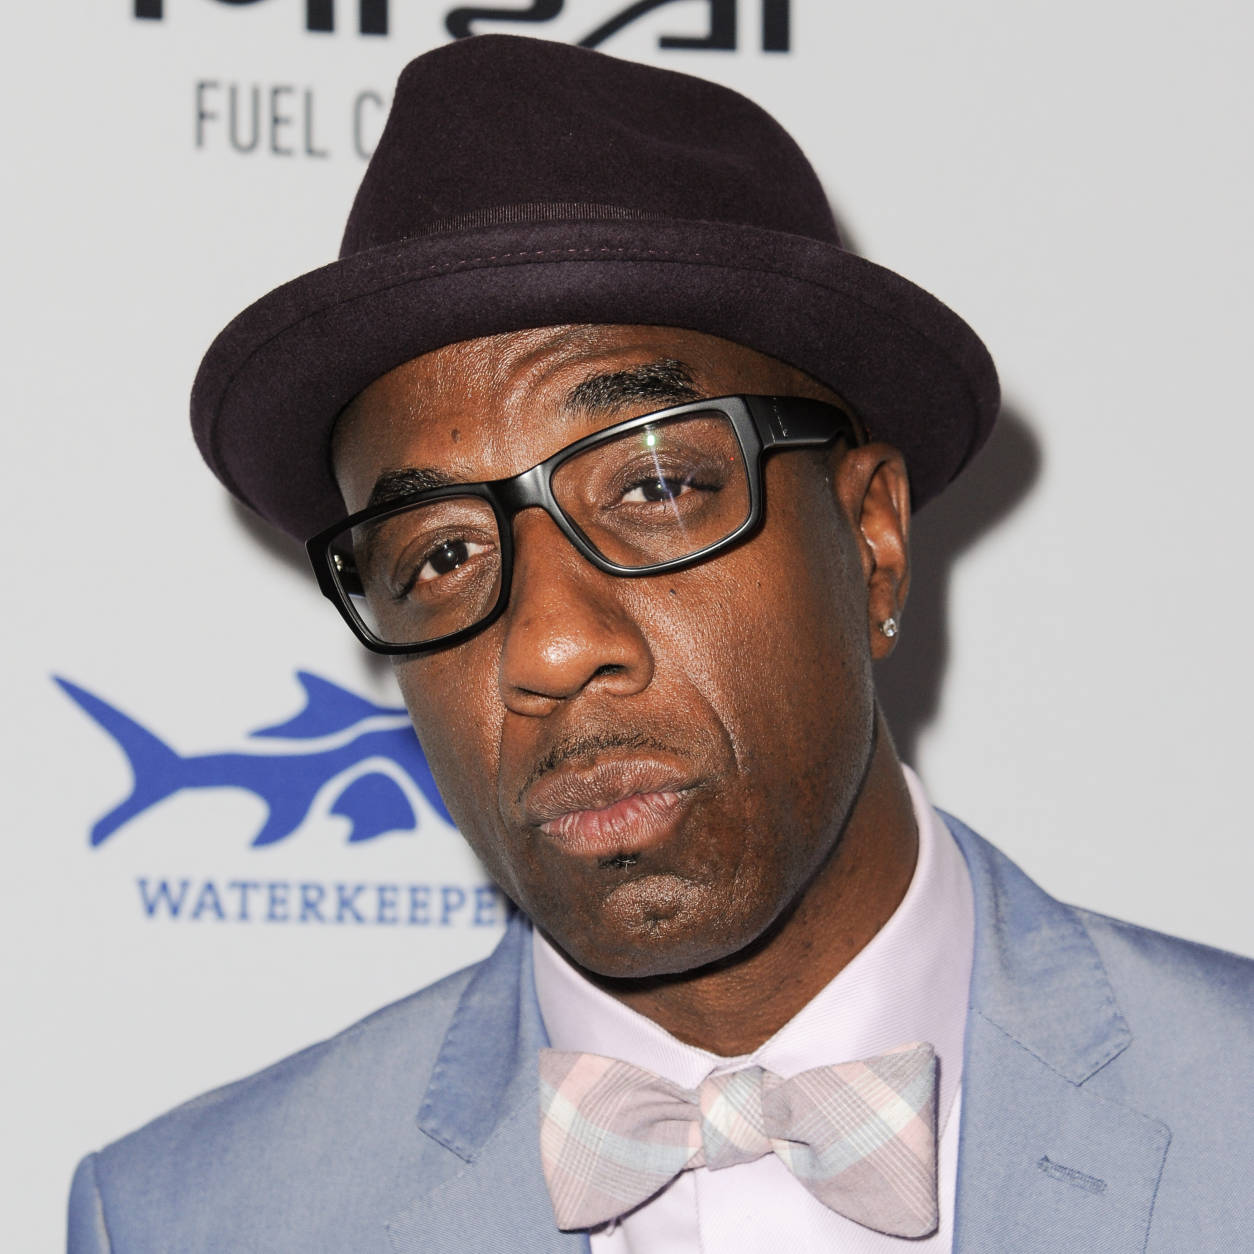 Comedian JB Smoove arrives at "Keep It Clean" Live Comedy Benefit held at Avalon Hollywood on Wednesday, April 22, 2015, in Los Angeles. (Photo by Richard Shotwell/Invision/AP)